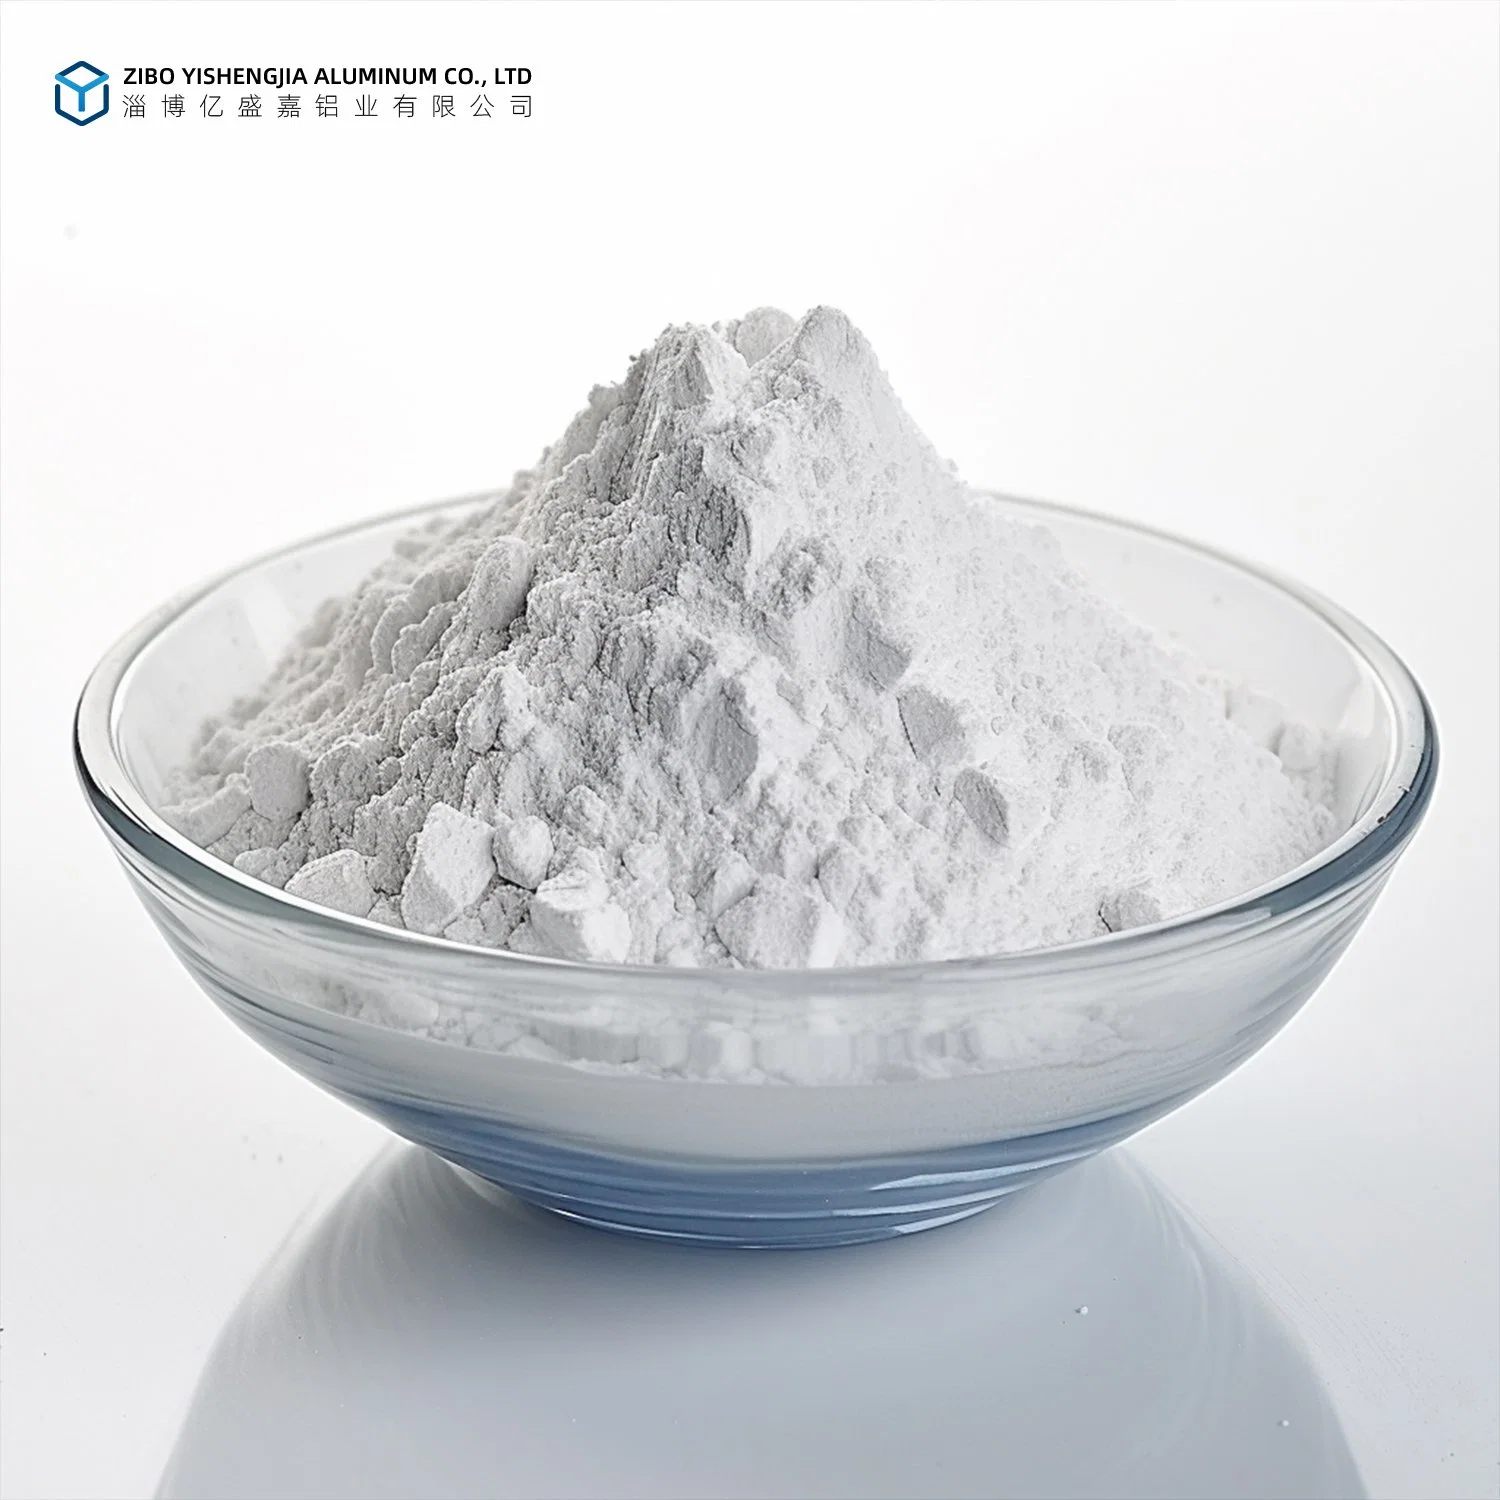 Common Pseudoboehmite/Alcohol Dewatering Catalyst to Ethylene